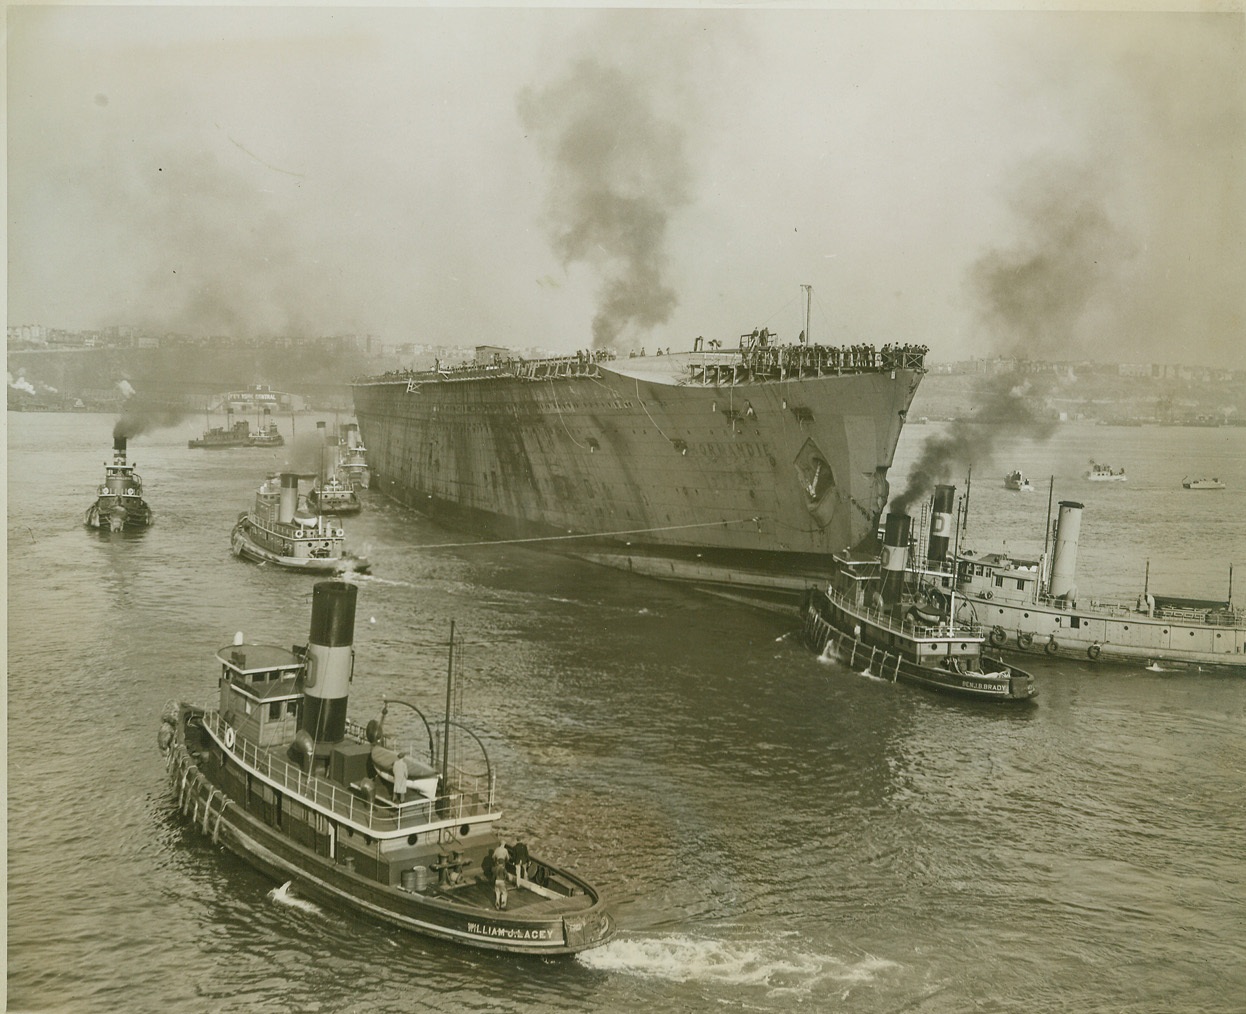 NORMANDIE HEADS FOR DRYDOCK, 11/3/1943. NEW YORK – Twenty tugs pushed and tugged the giant U.S.S. Lafayette, the former French luxury liner Normandie, down the North River when the vessel left its pier for the first time in four years, Nov. 3. Seized by the U.S. Government, almost destroyed by fire, capsized at her dock and later refloated, the great grey ship is en route to drydock at an undisclosed destination. Credit: OWI Radiophoto from ACME;